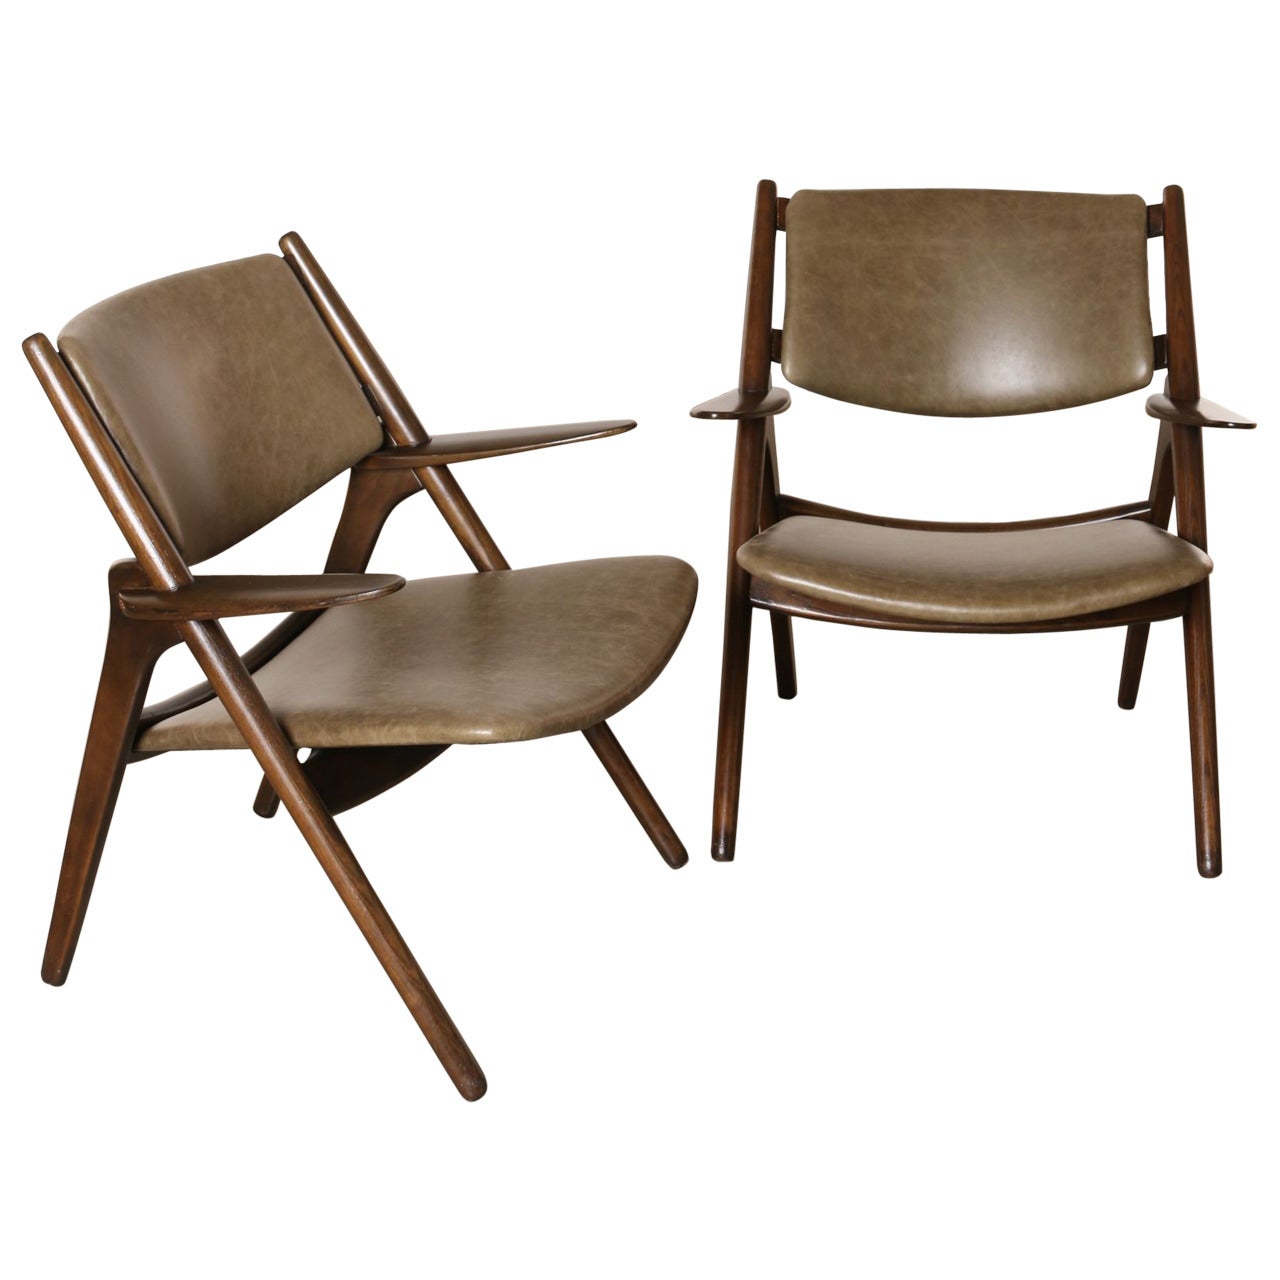 Pair of Vintage Sawbuck Lounge Chairs with Leather Seats, circa 1960s